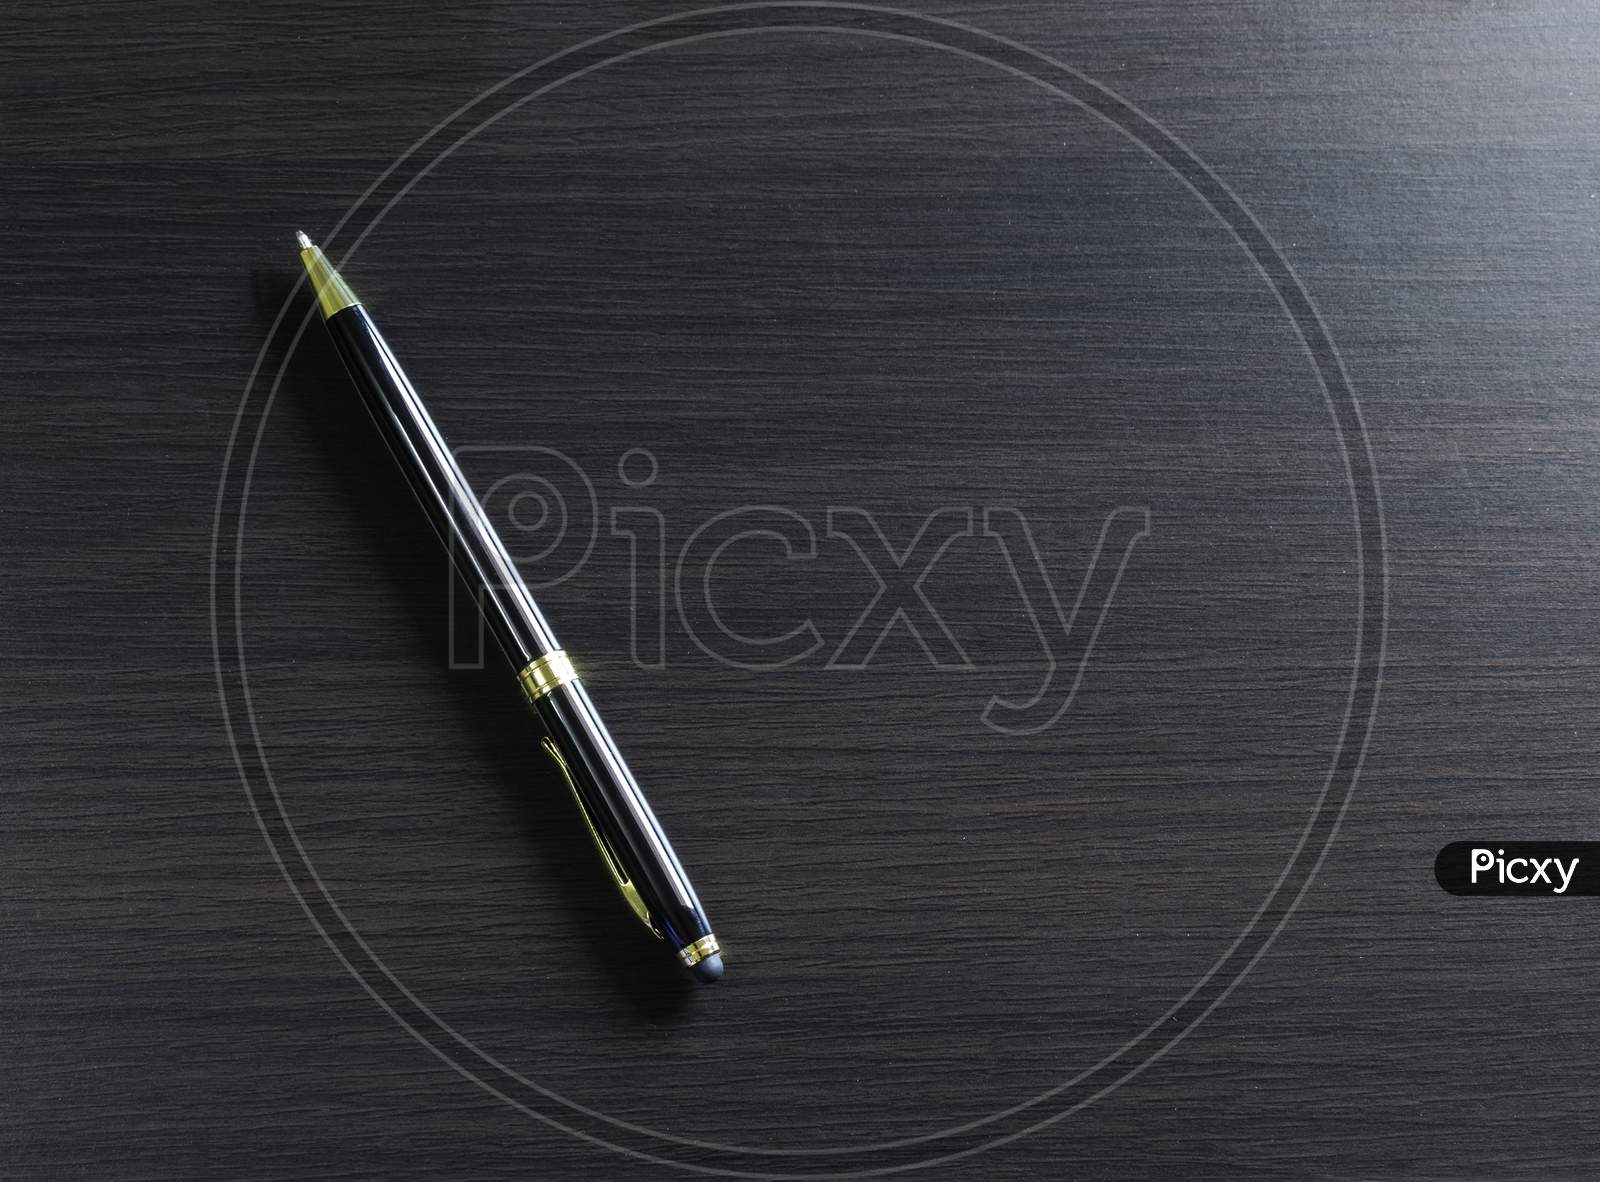 A Pen Laying On A Black Table With Window Light